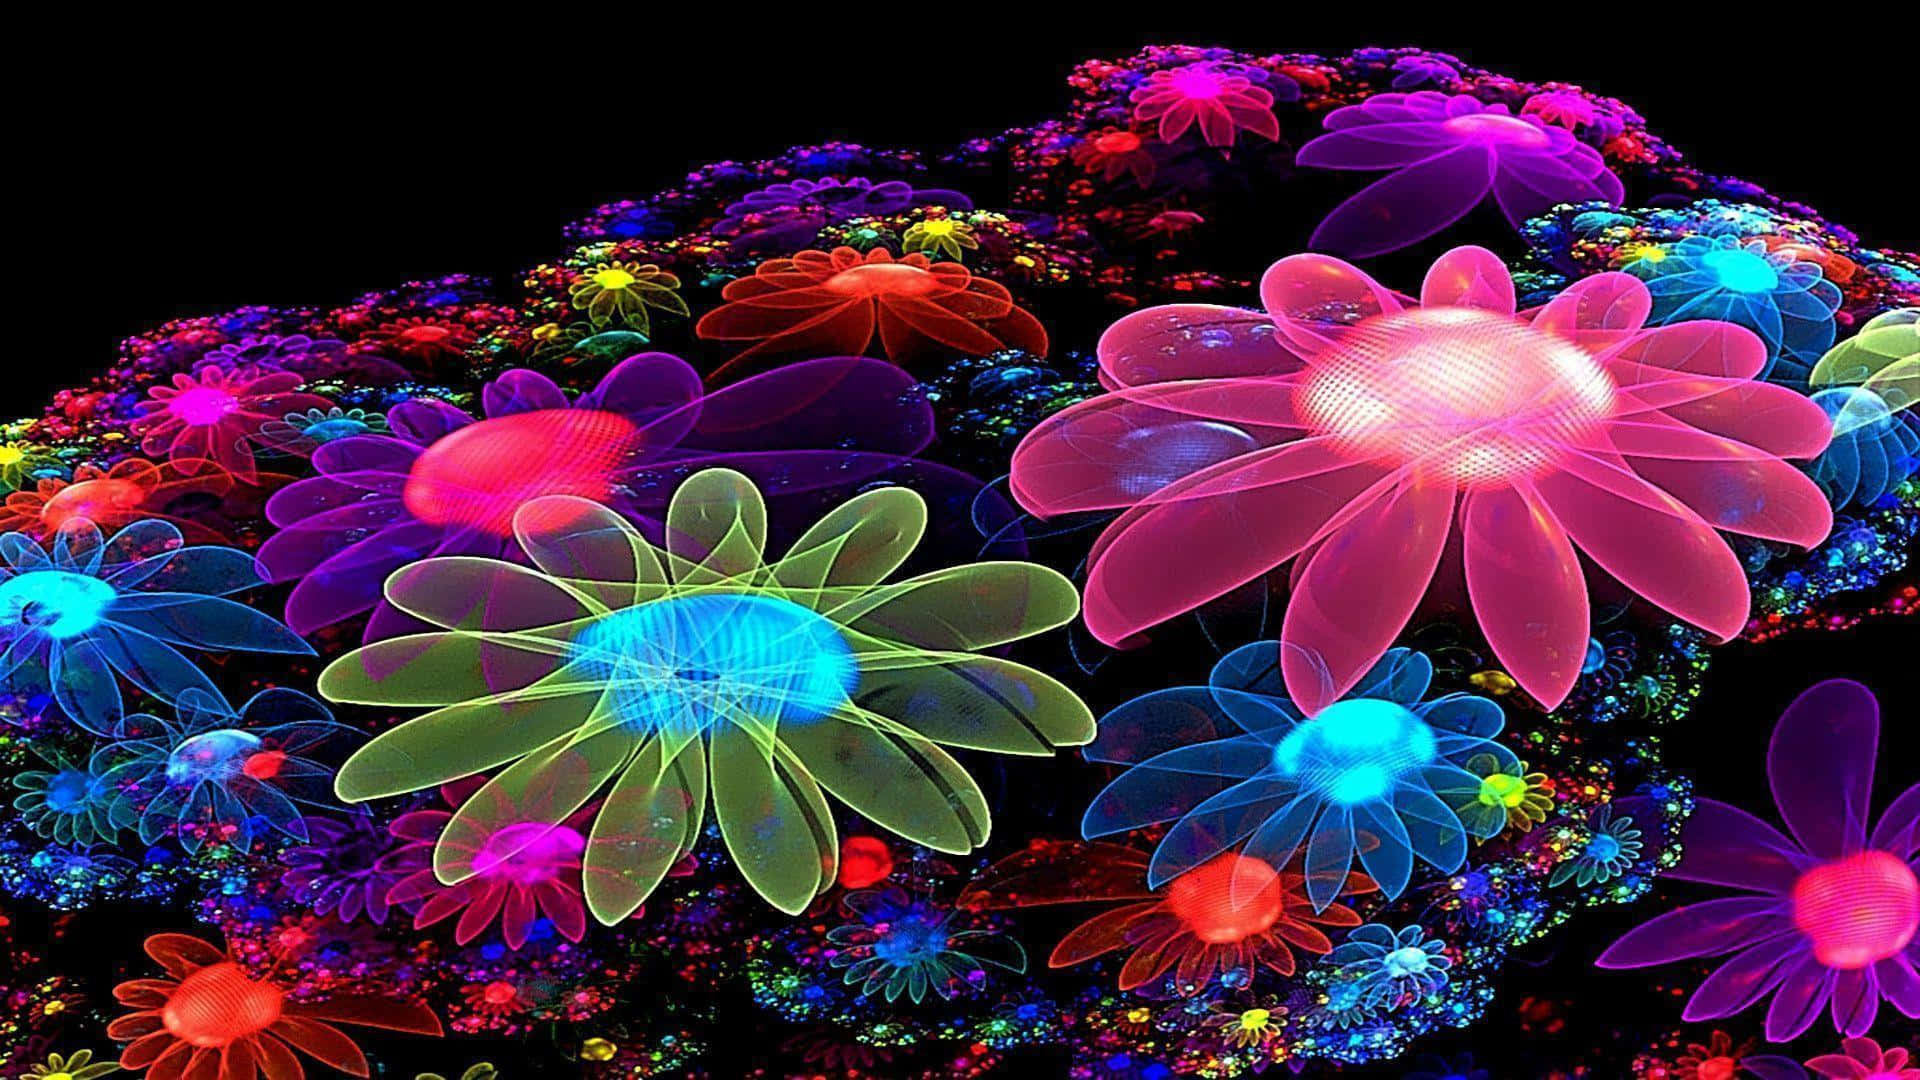 Digital Art Of Cool Colored Flower Abstract Wallpaper